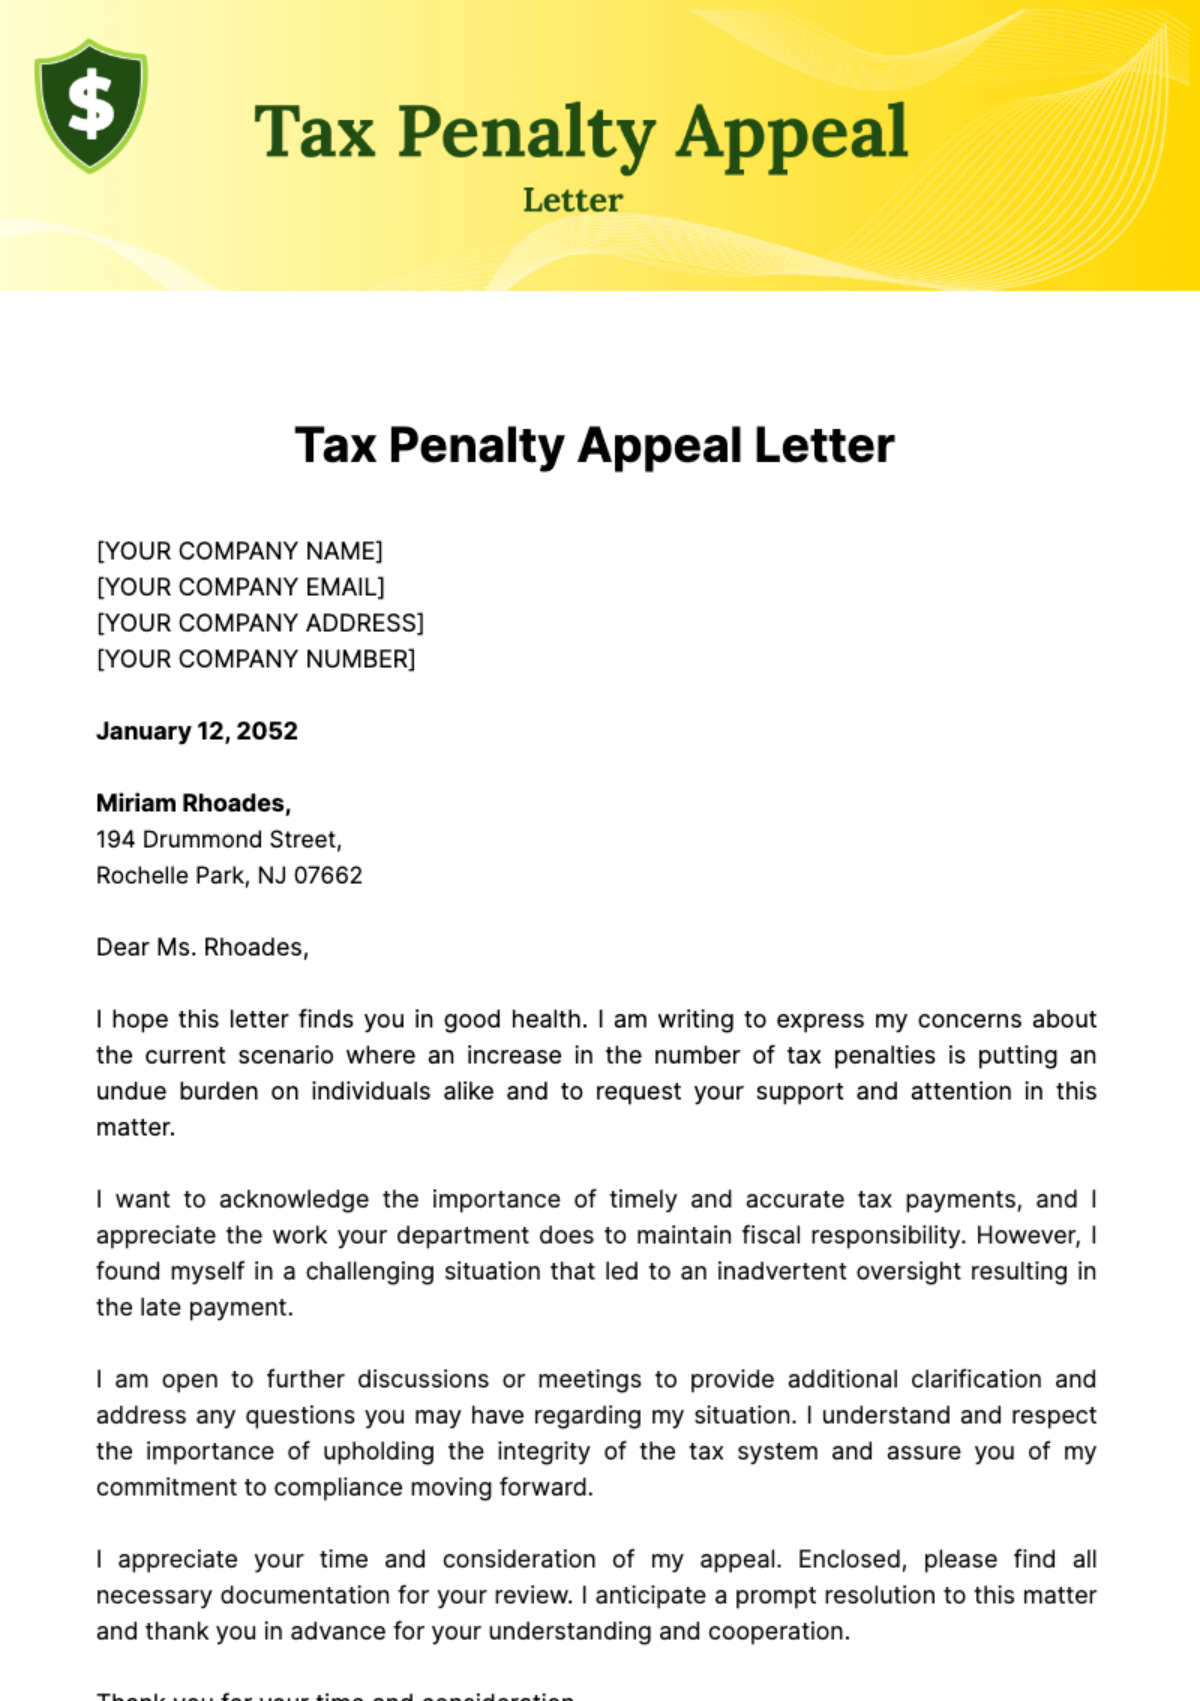 Tax Penalty Appeal Letter Template